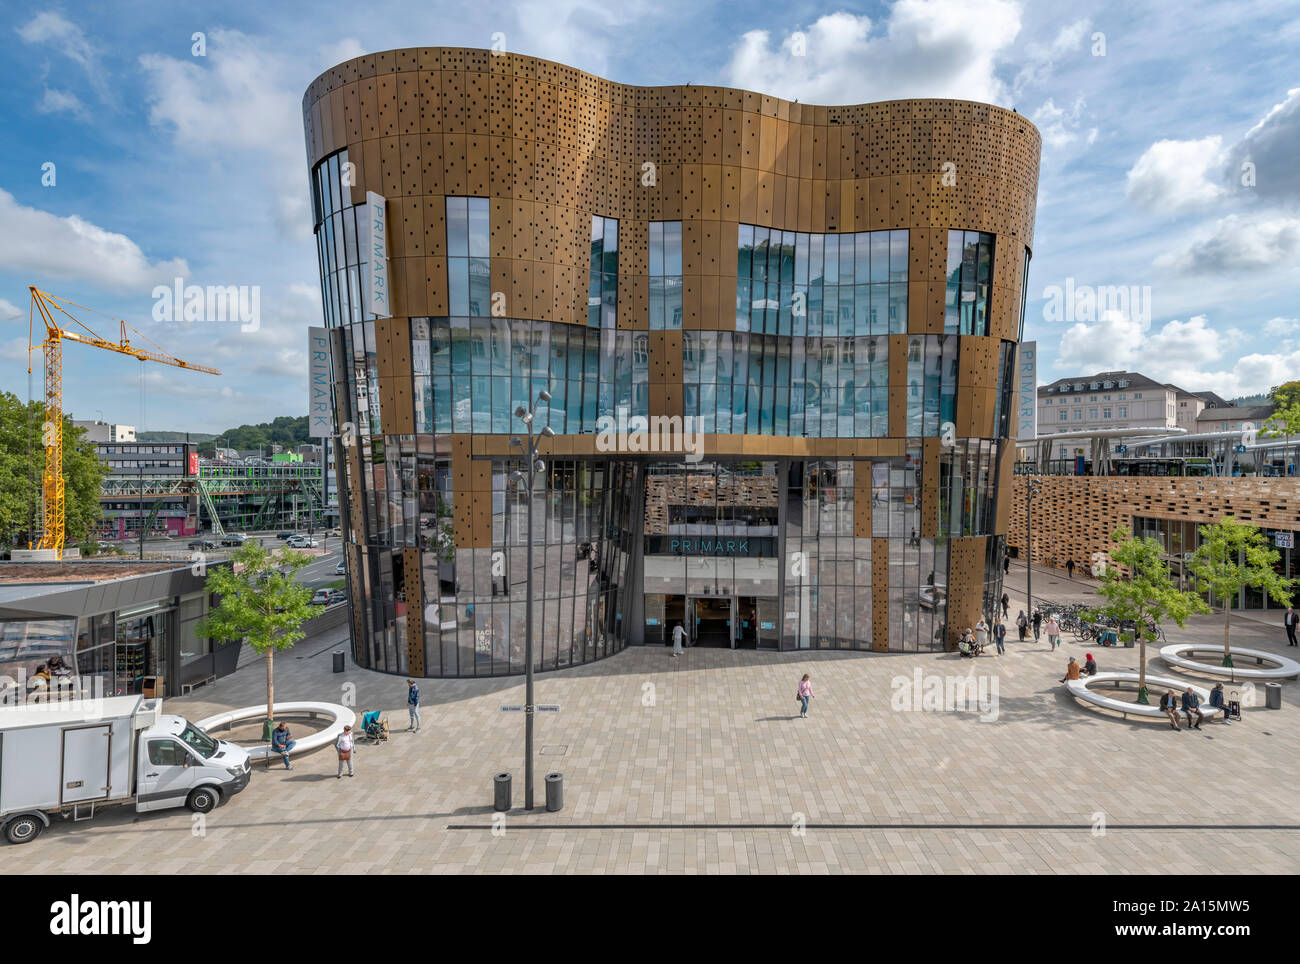 Primark's flagship store on City Plaza in Wuppertal, Germany. Designed by architects Chapman Taylor. Stock Photo